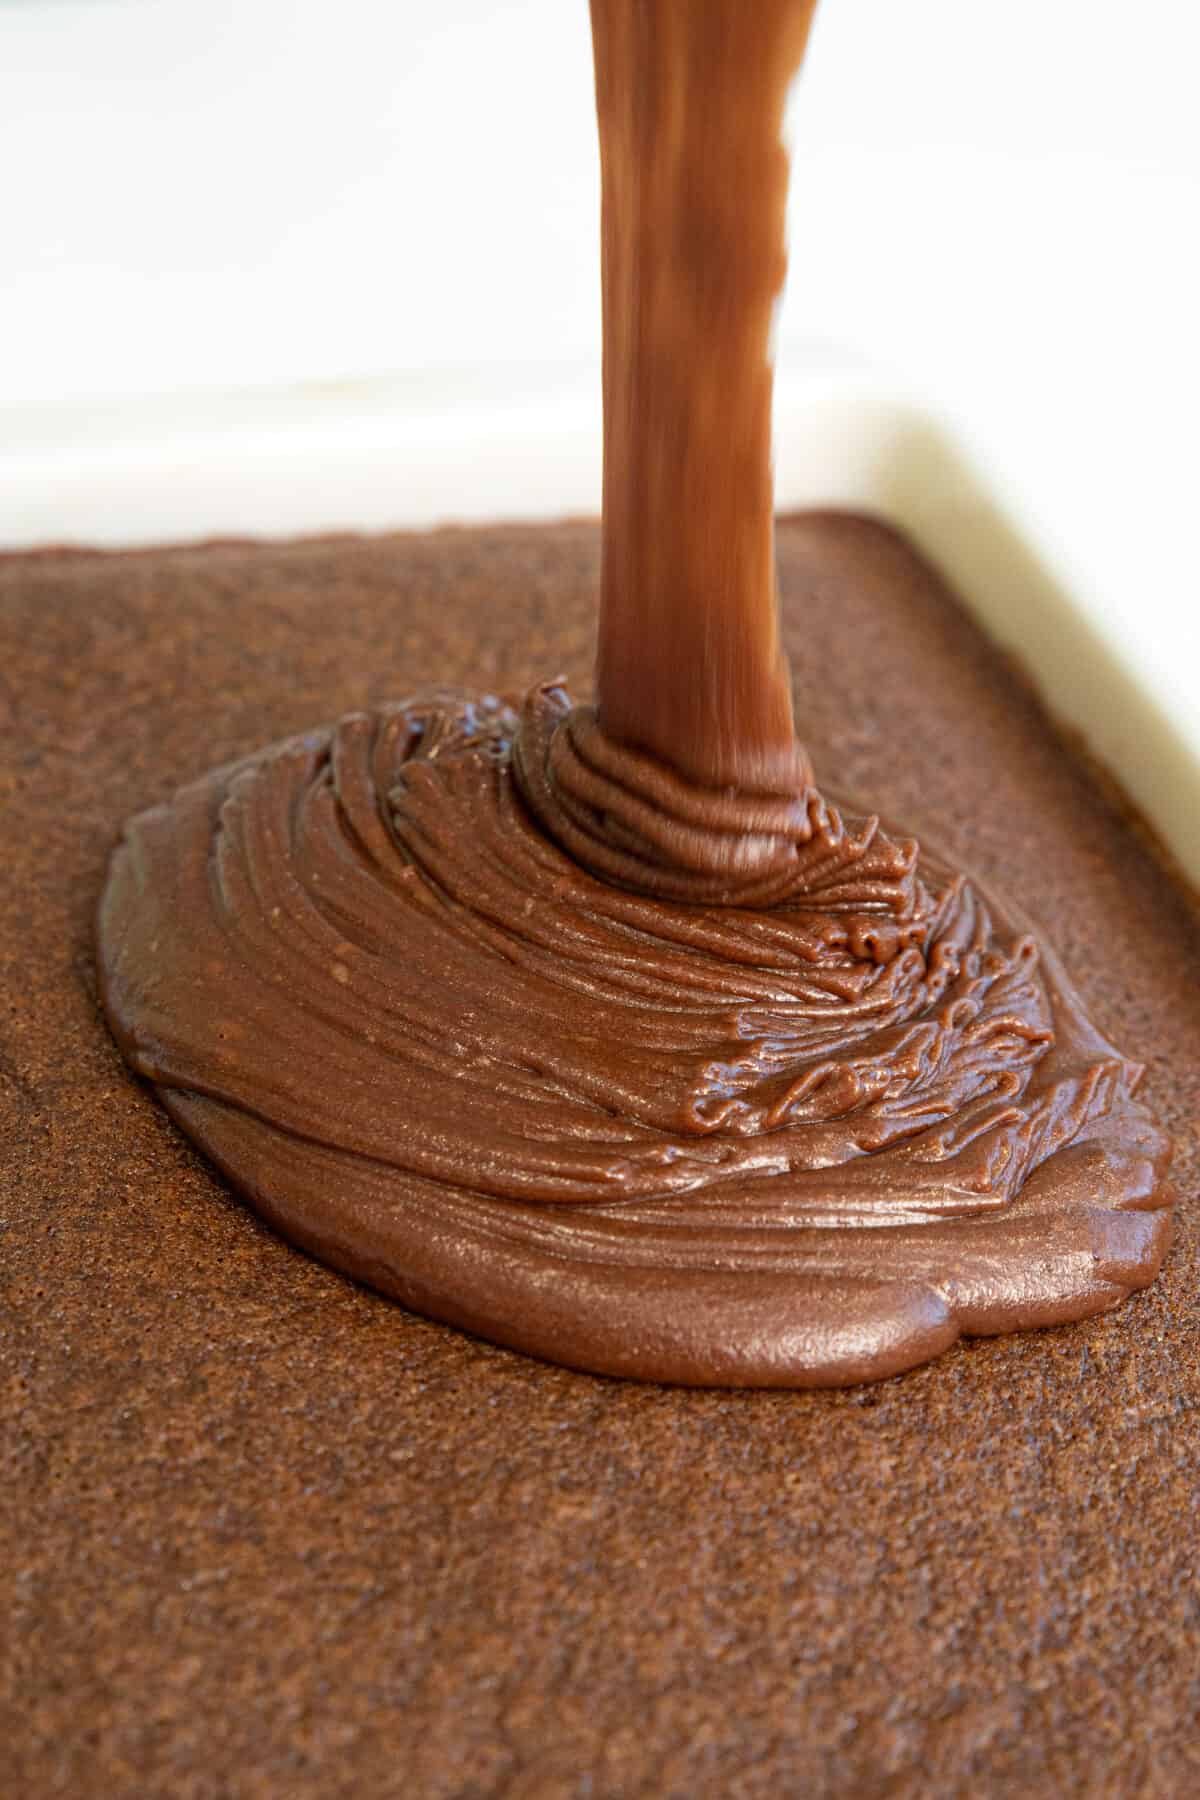 hot chocolate fudge frosting being poured onto a chocolate cake